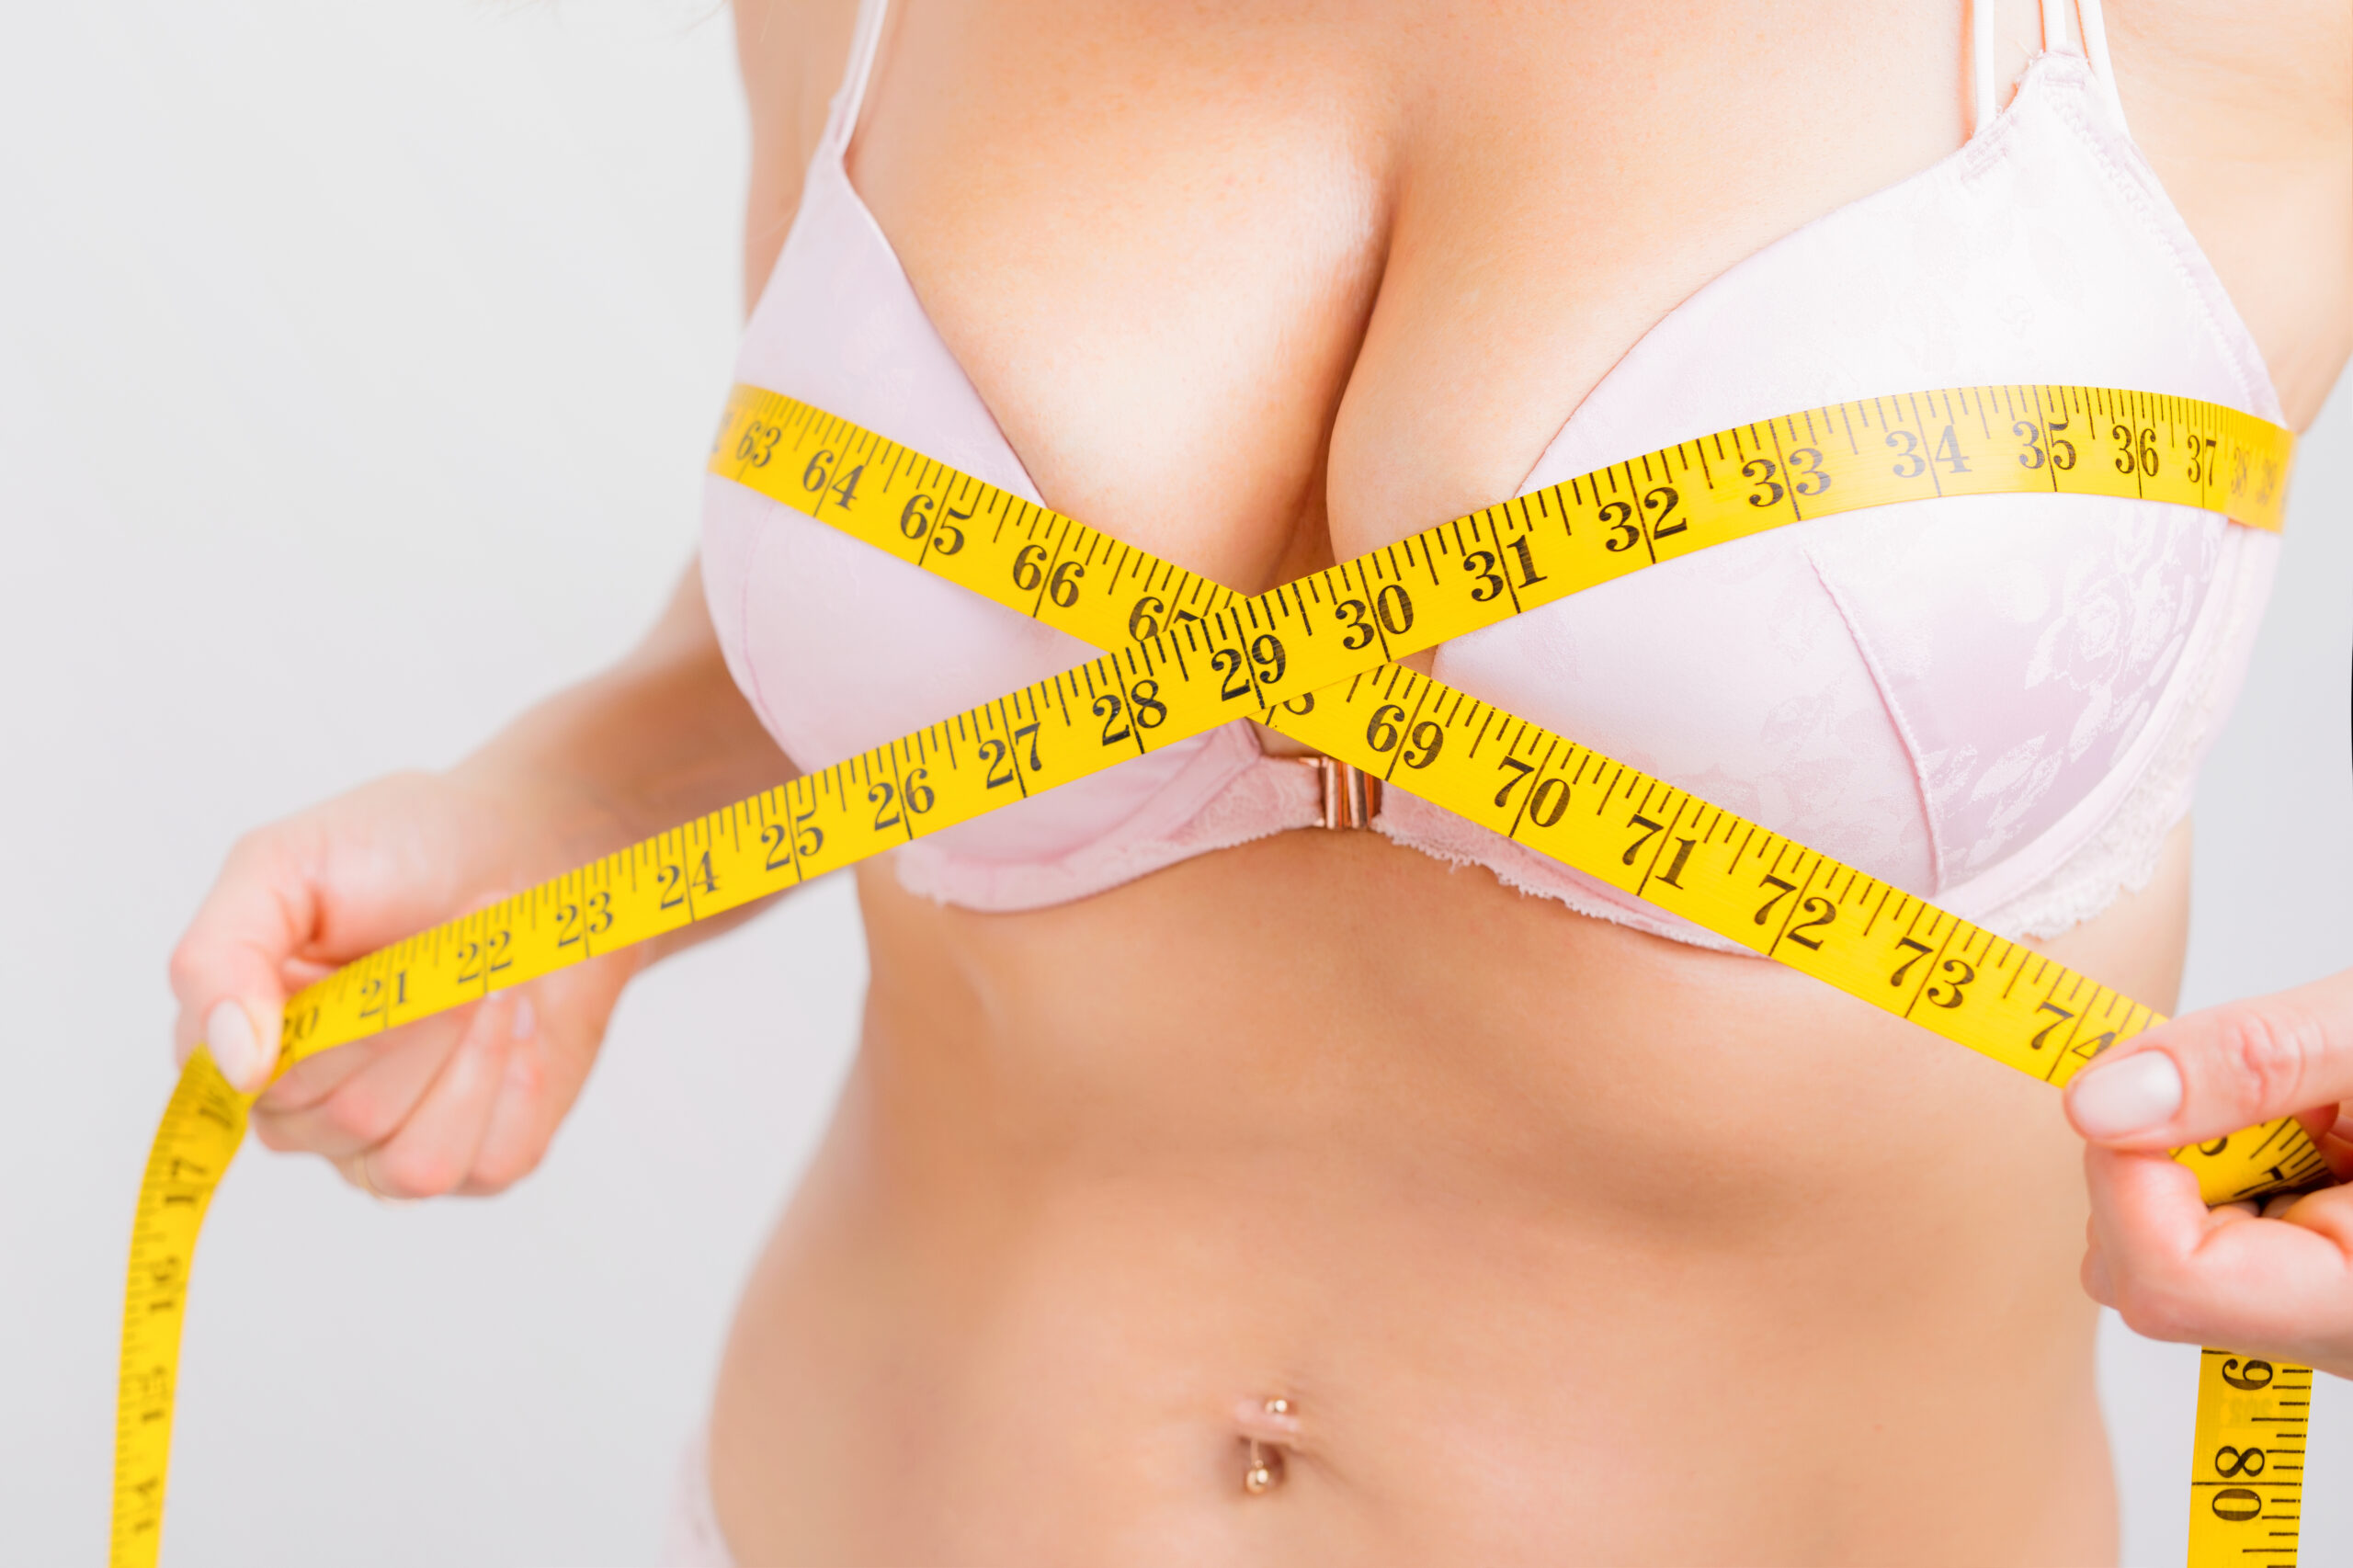 breast reduction surgery recovery - HR Plastic Surgery